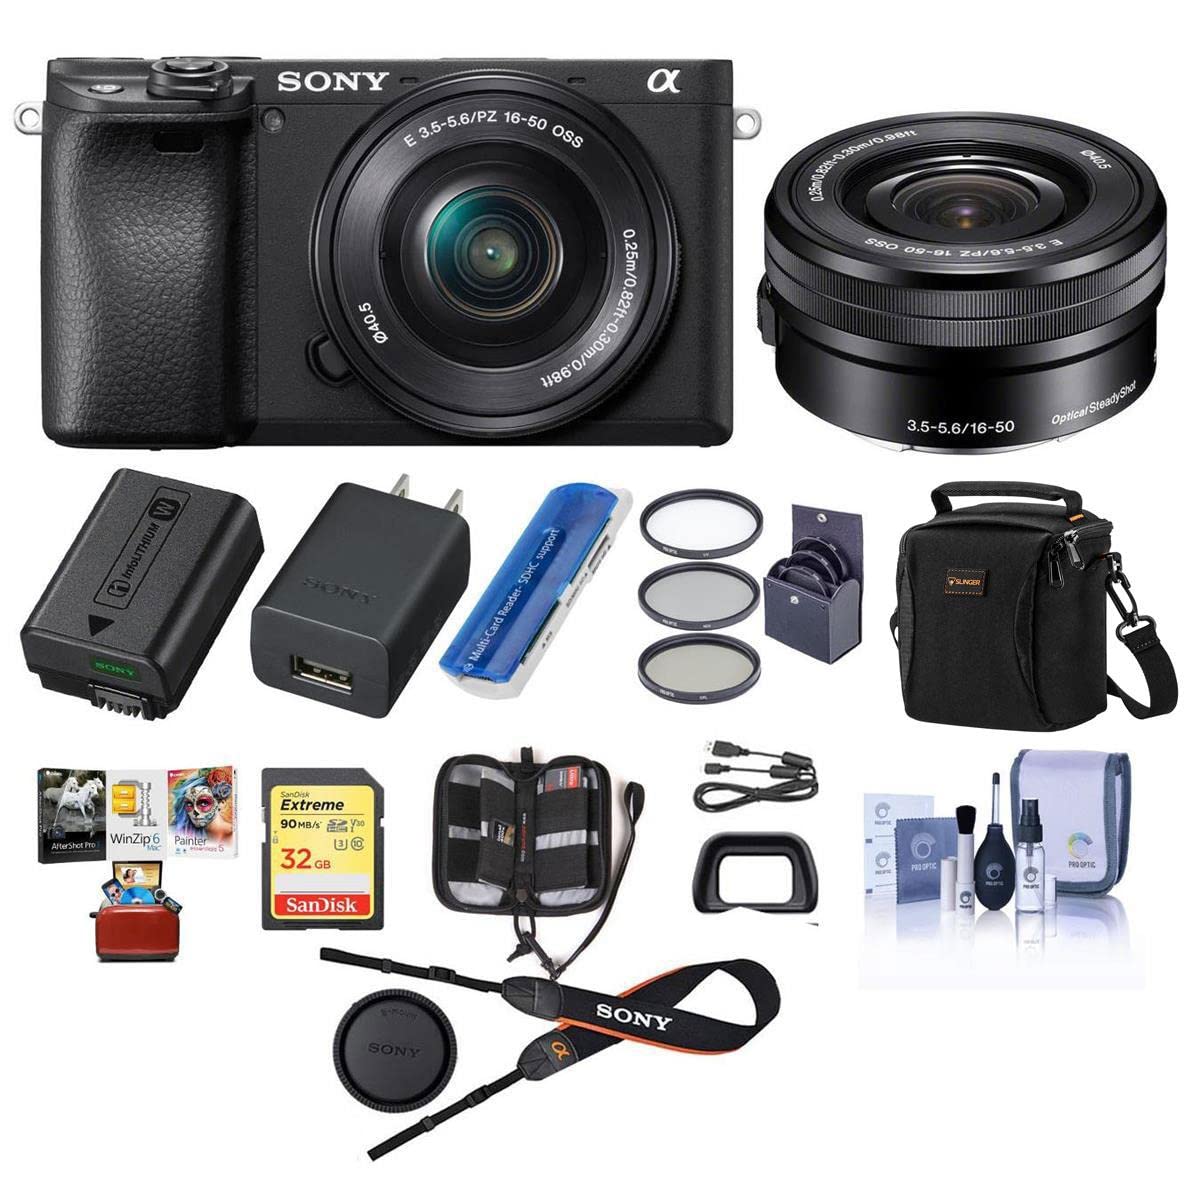 Sony Alpha a6400 24.2MP Mirrorless Digital Camera with 16-50mm f/3.5-5.6 OSS Lens - Bundle with Camera Case, 32GB SDHC Card, 40.5mm Filter Kit, Card Reader, Memory Wallet, With Software (Mac Software)